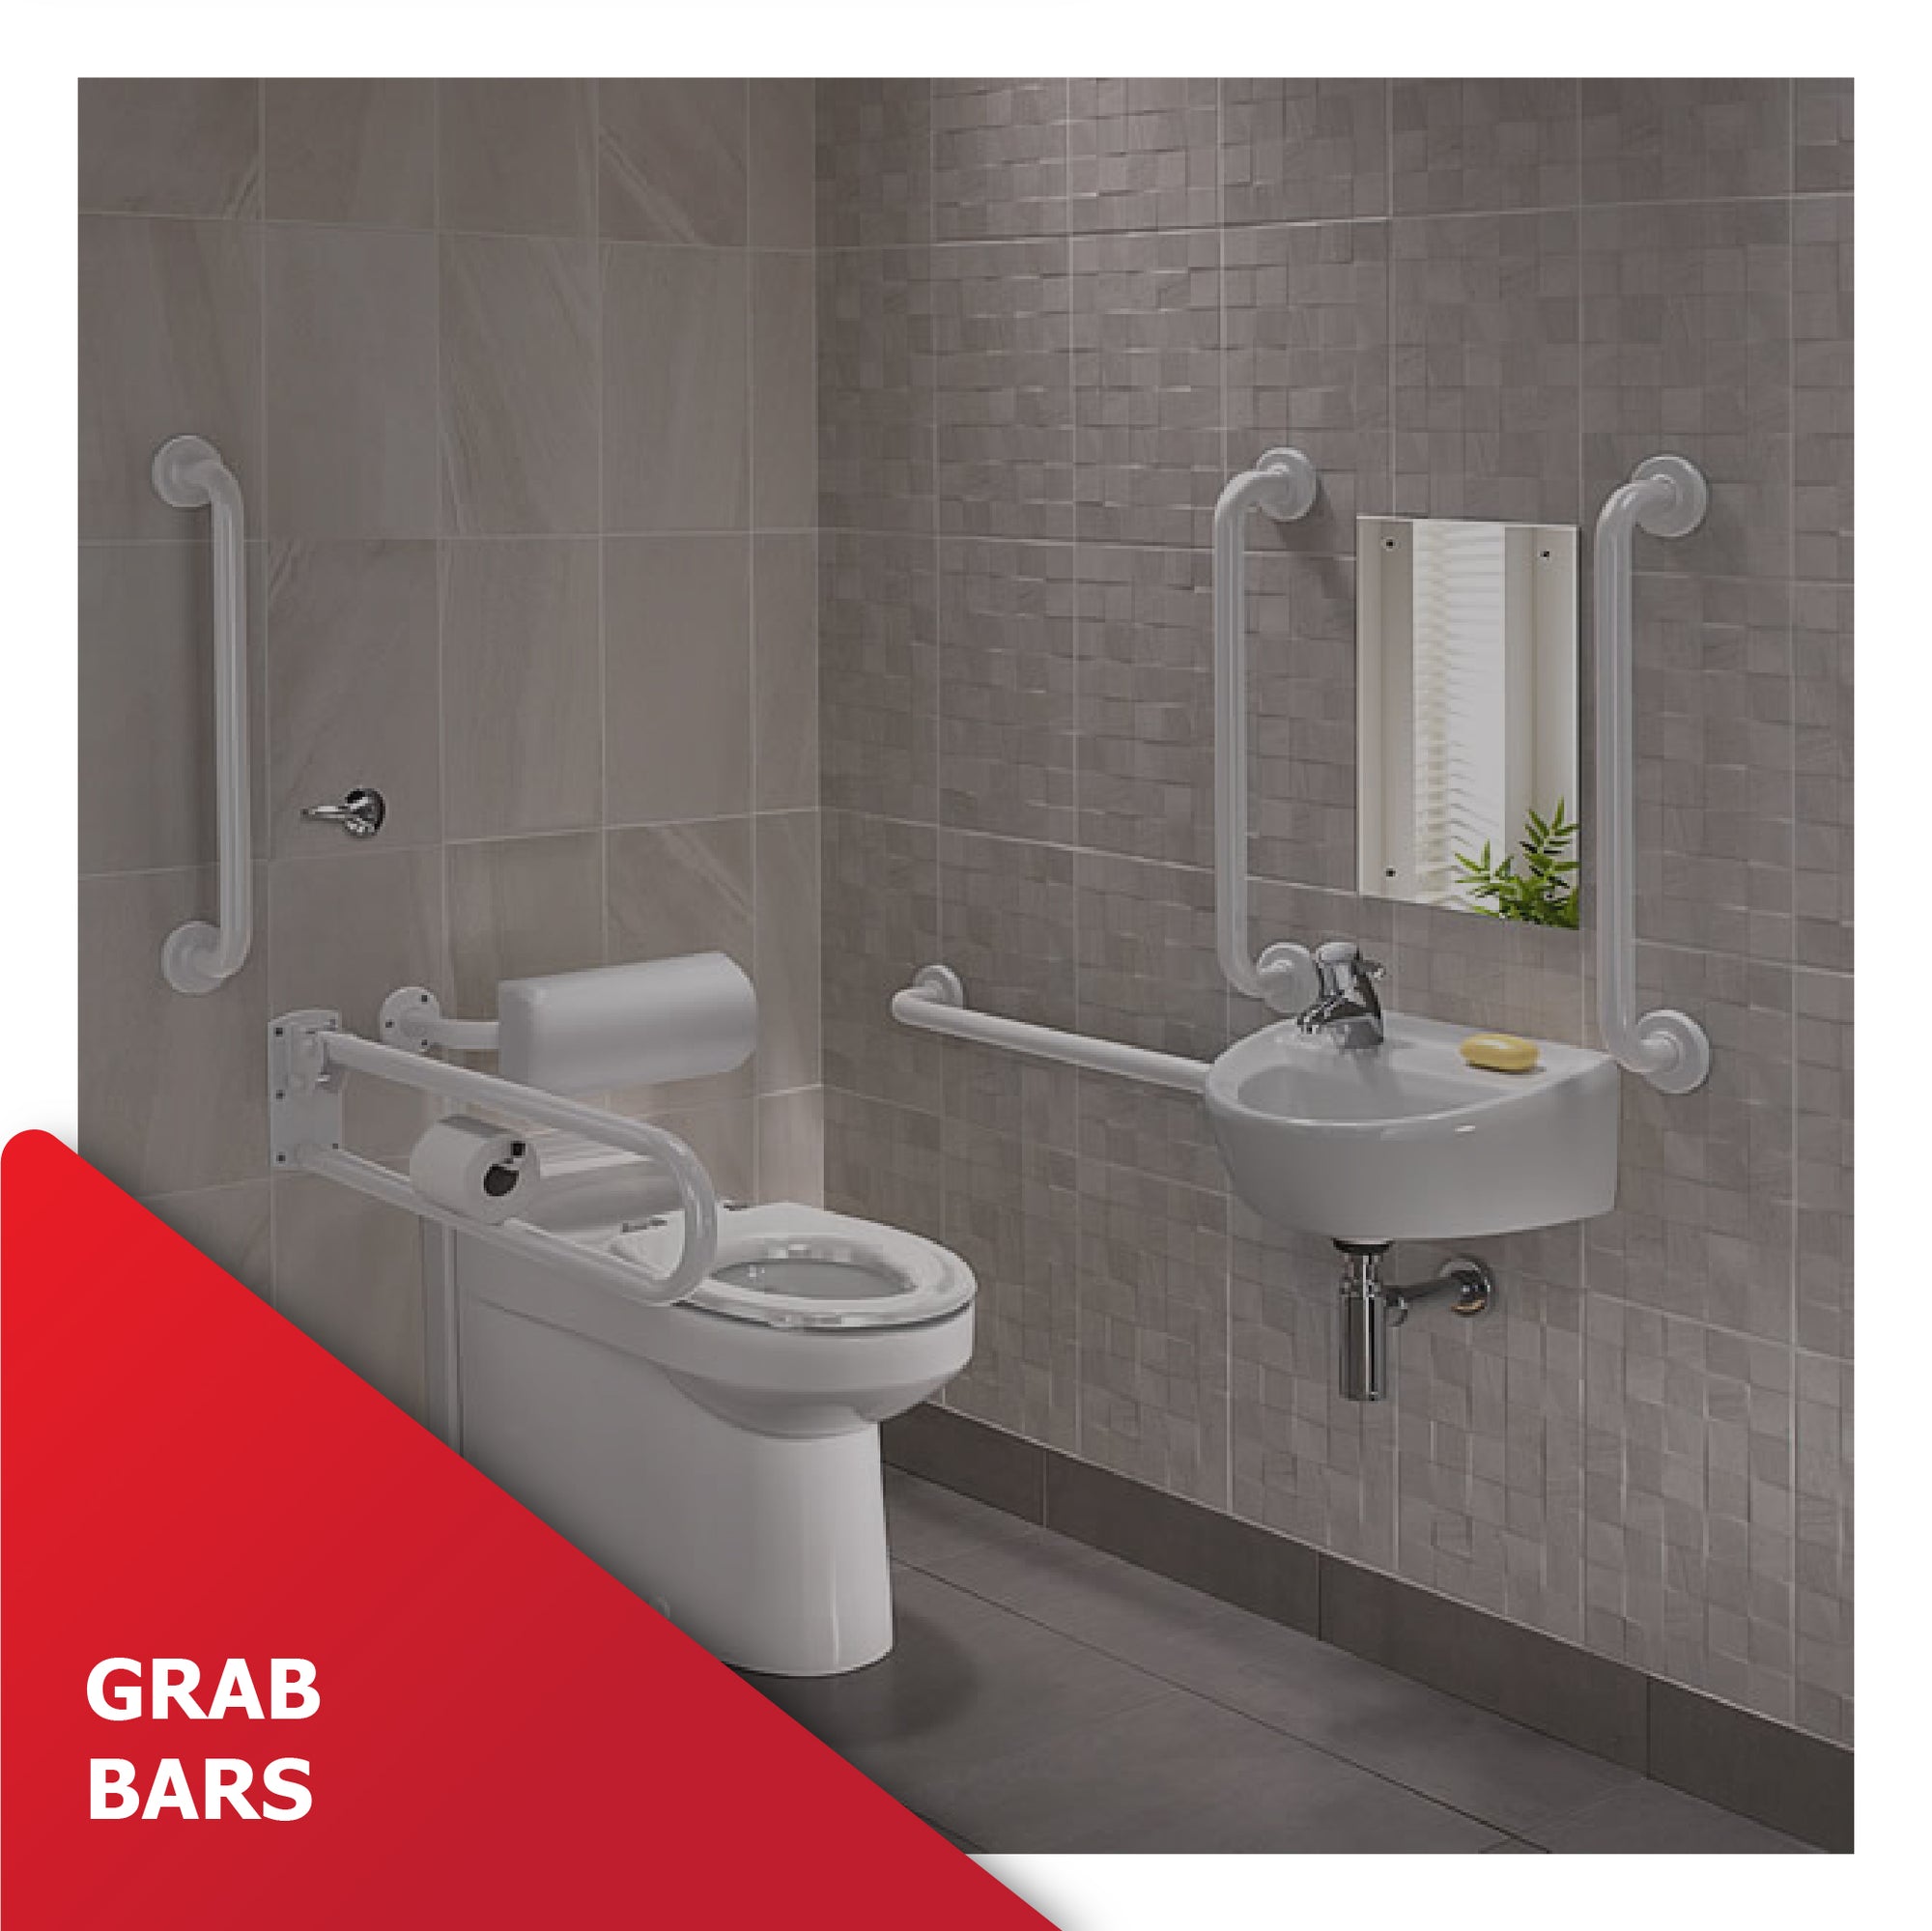 Safety First - Grab Bars for Bathrooms